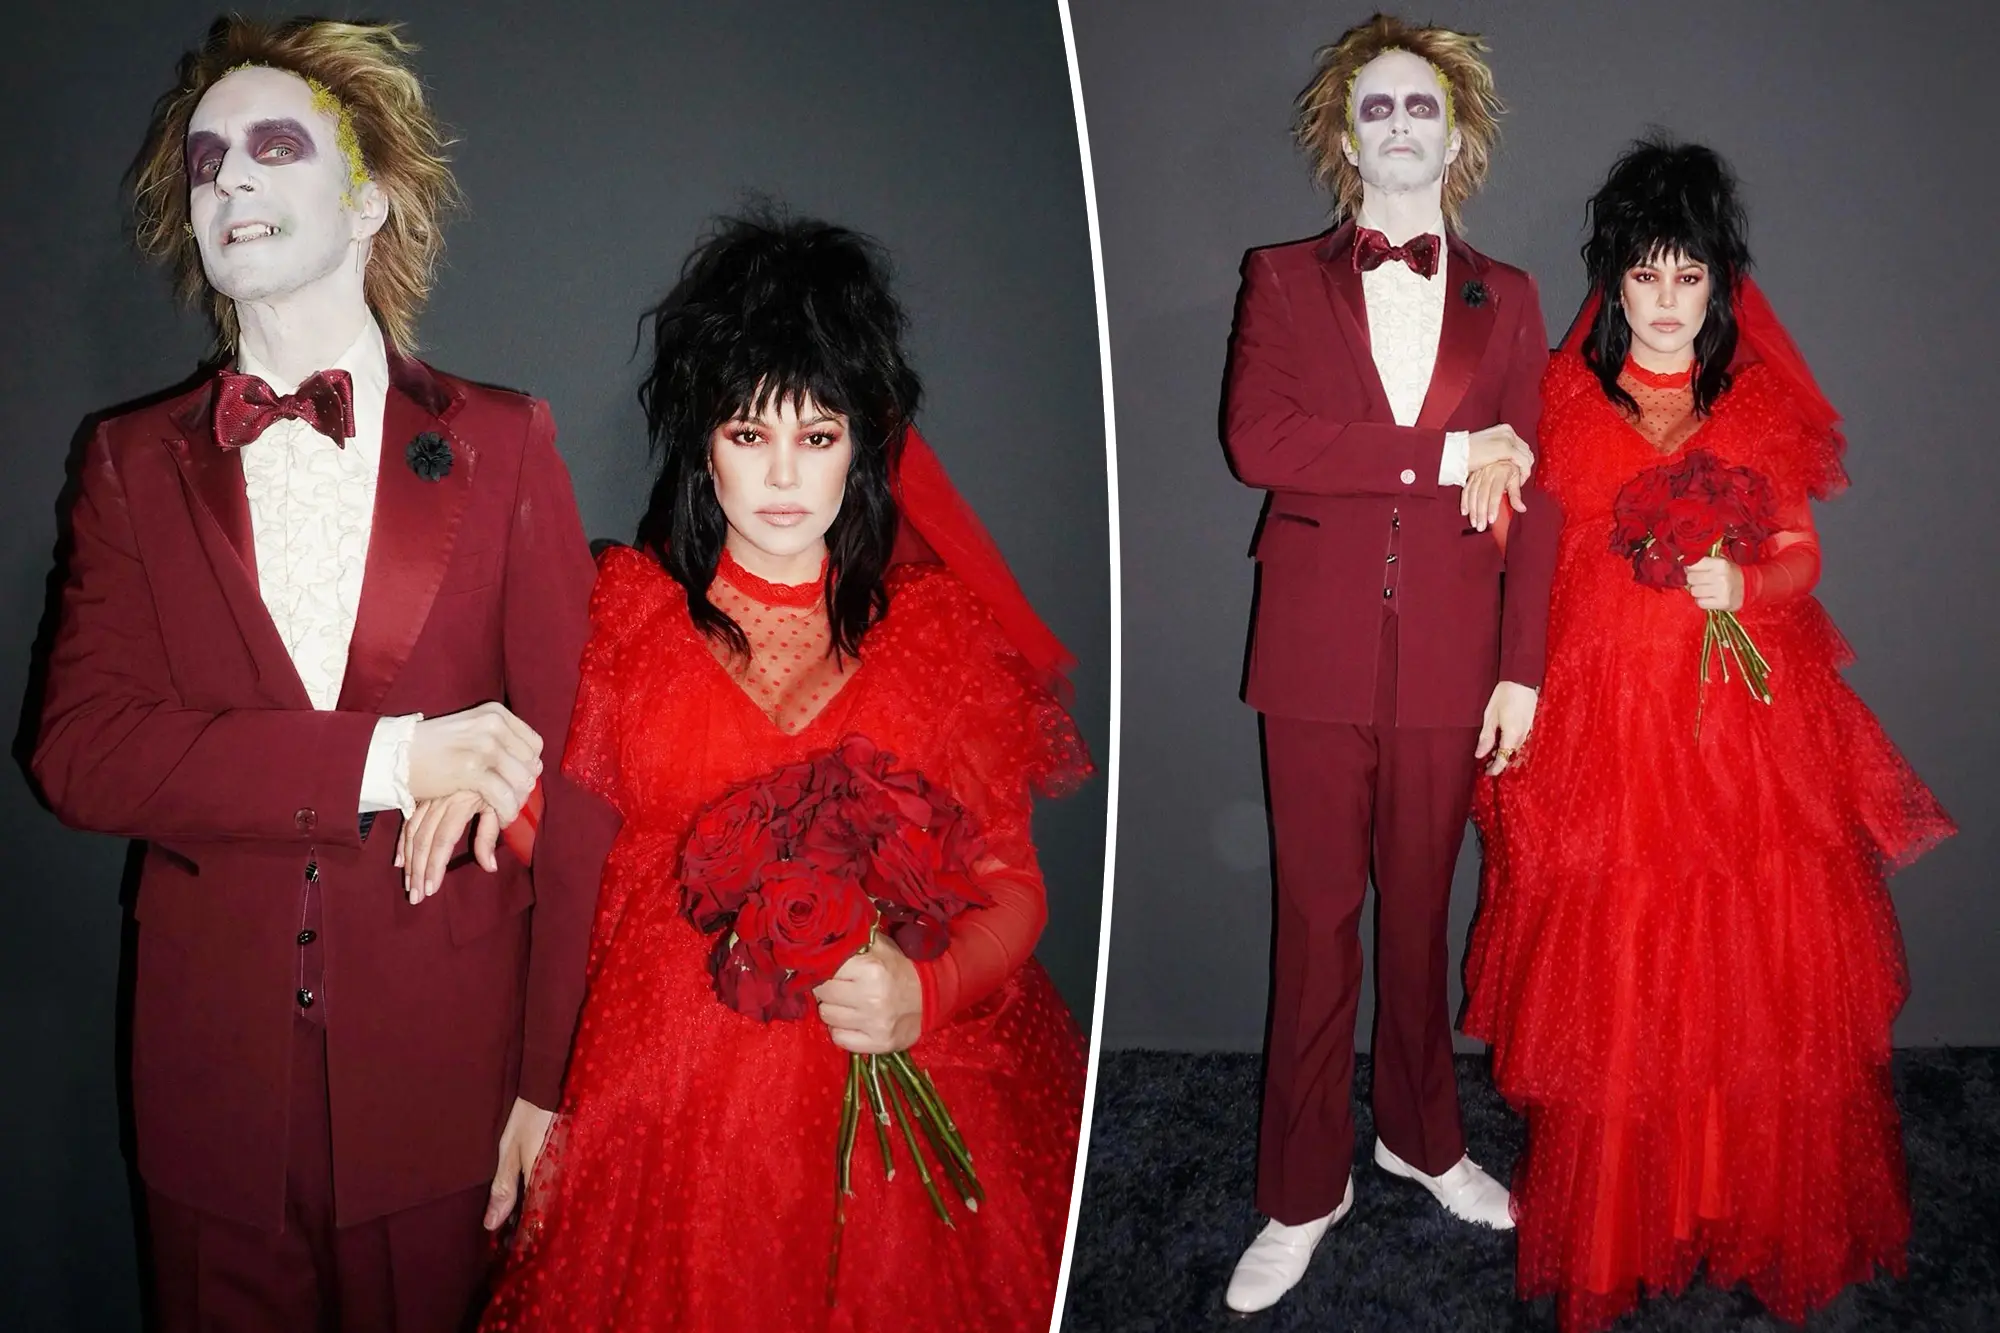 Kardashians Transform Into Iconic Movie Characters For Halloween